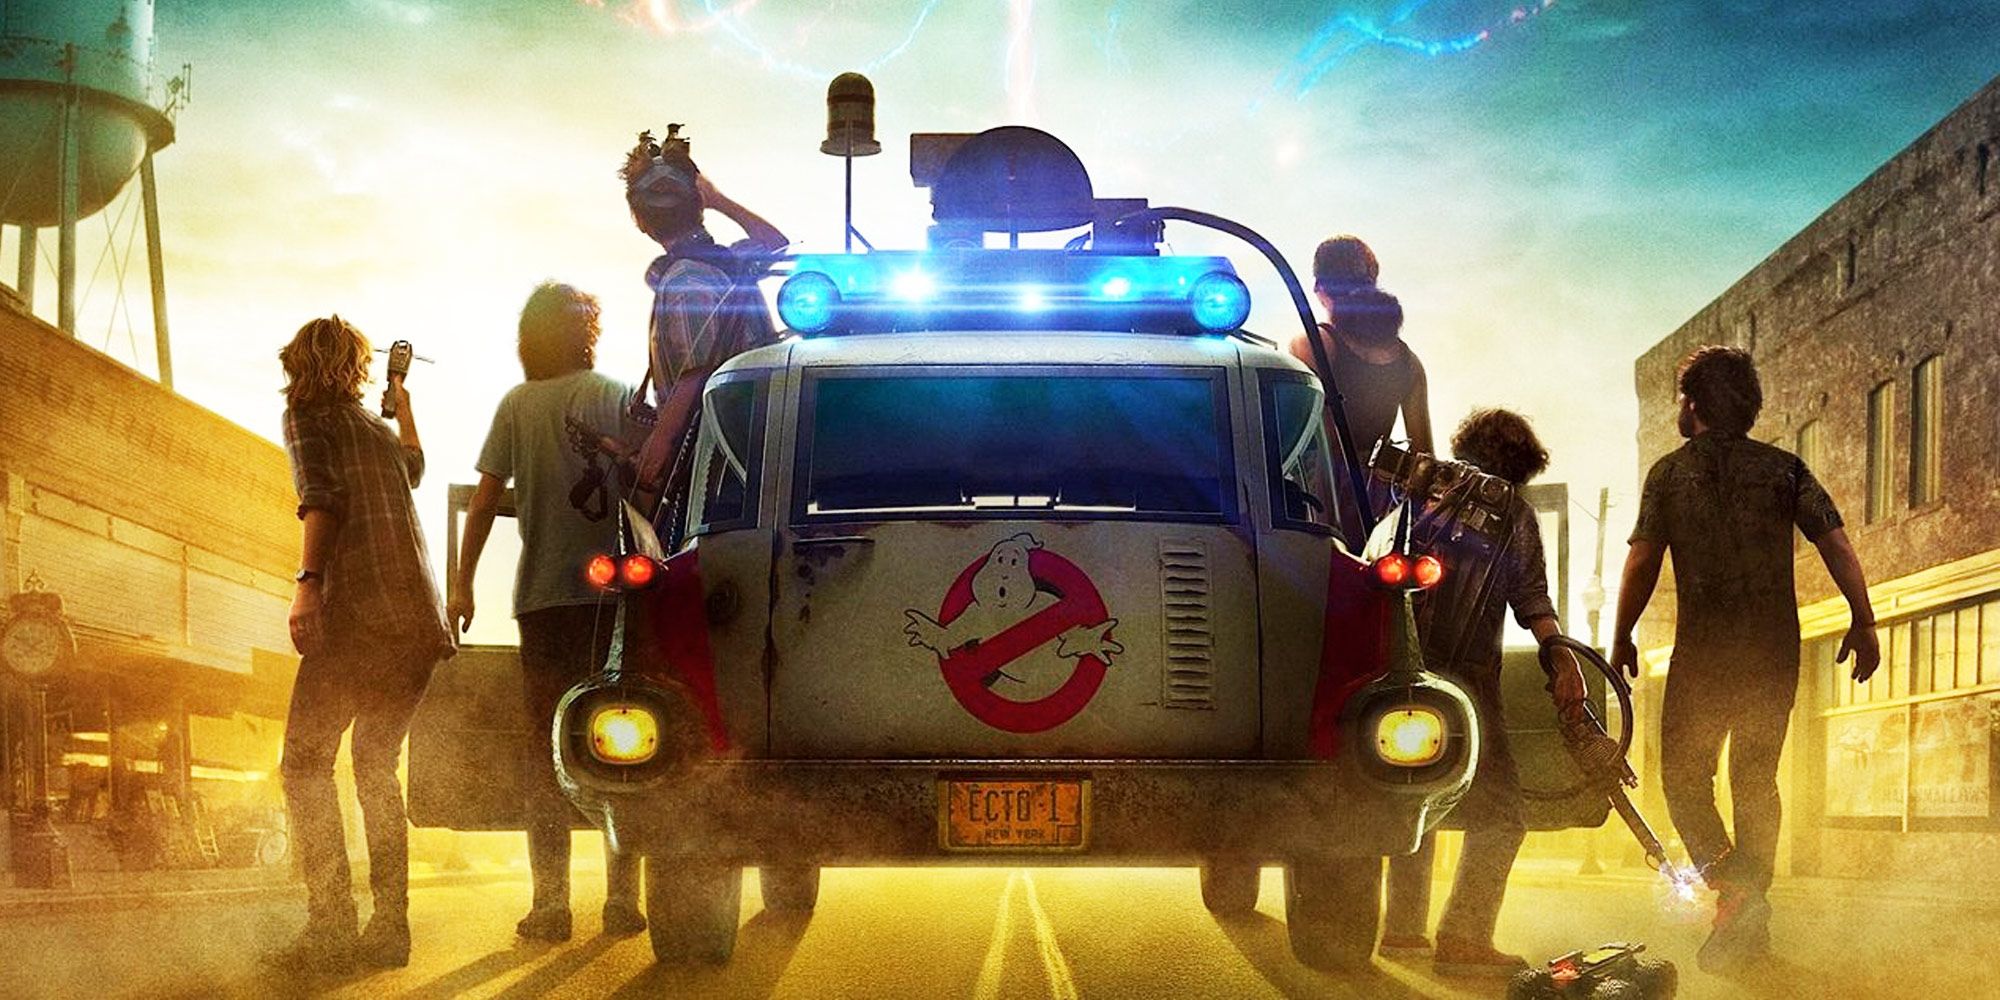 Ghostbusters Franchise Needs A Complete Reimagining (Or To End For Good)